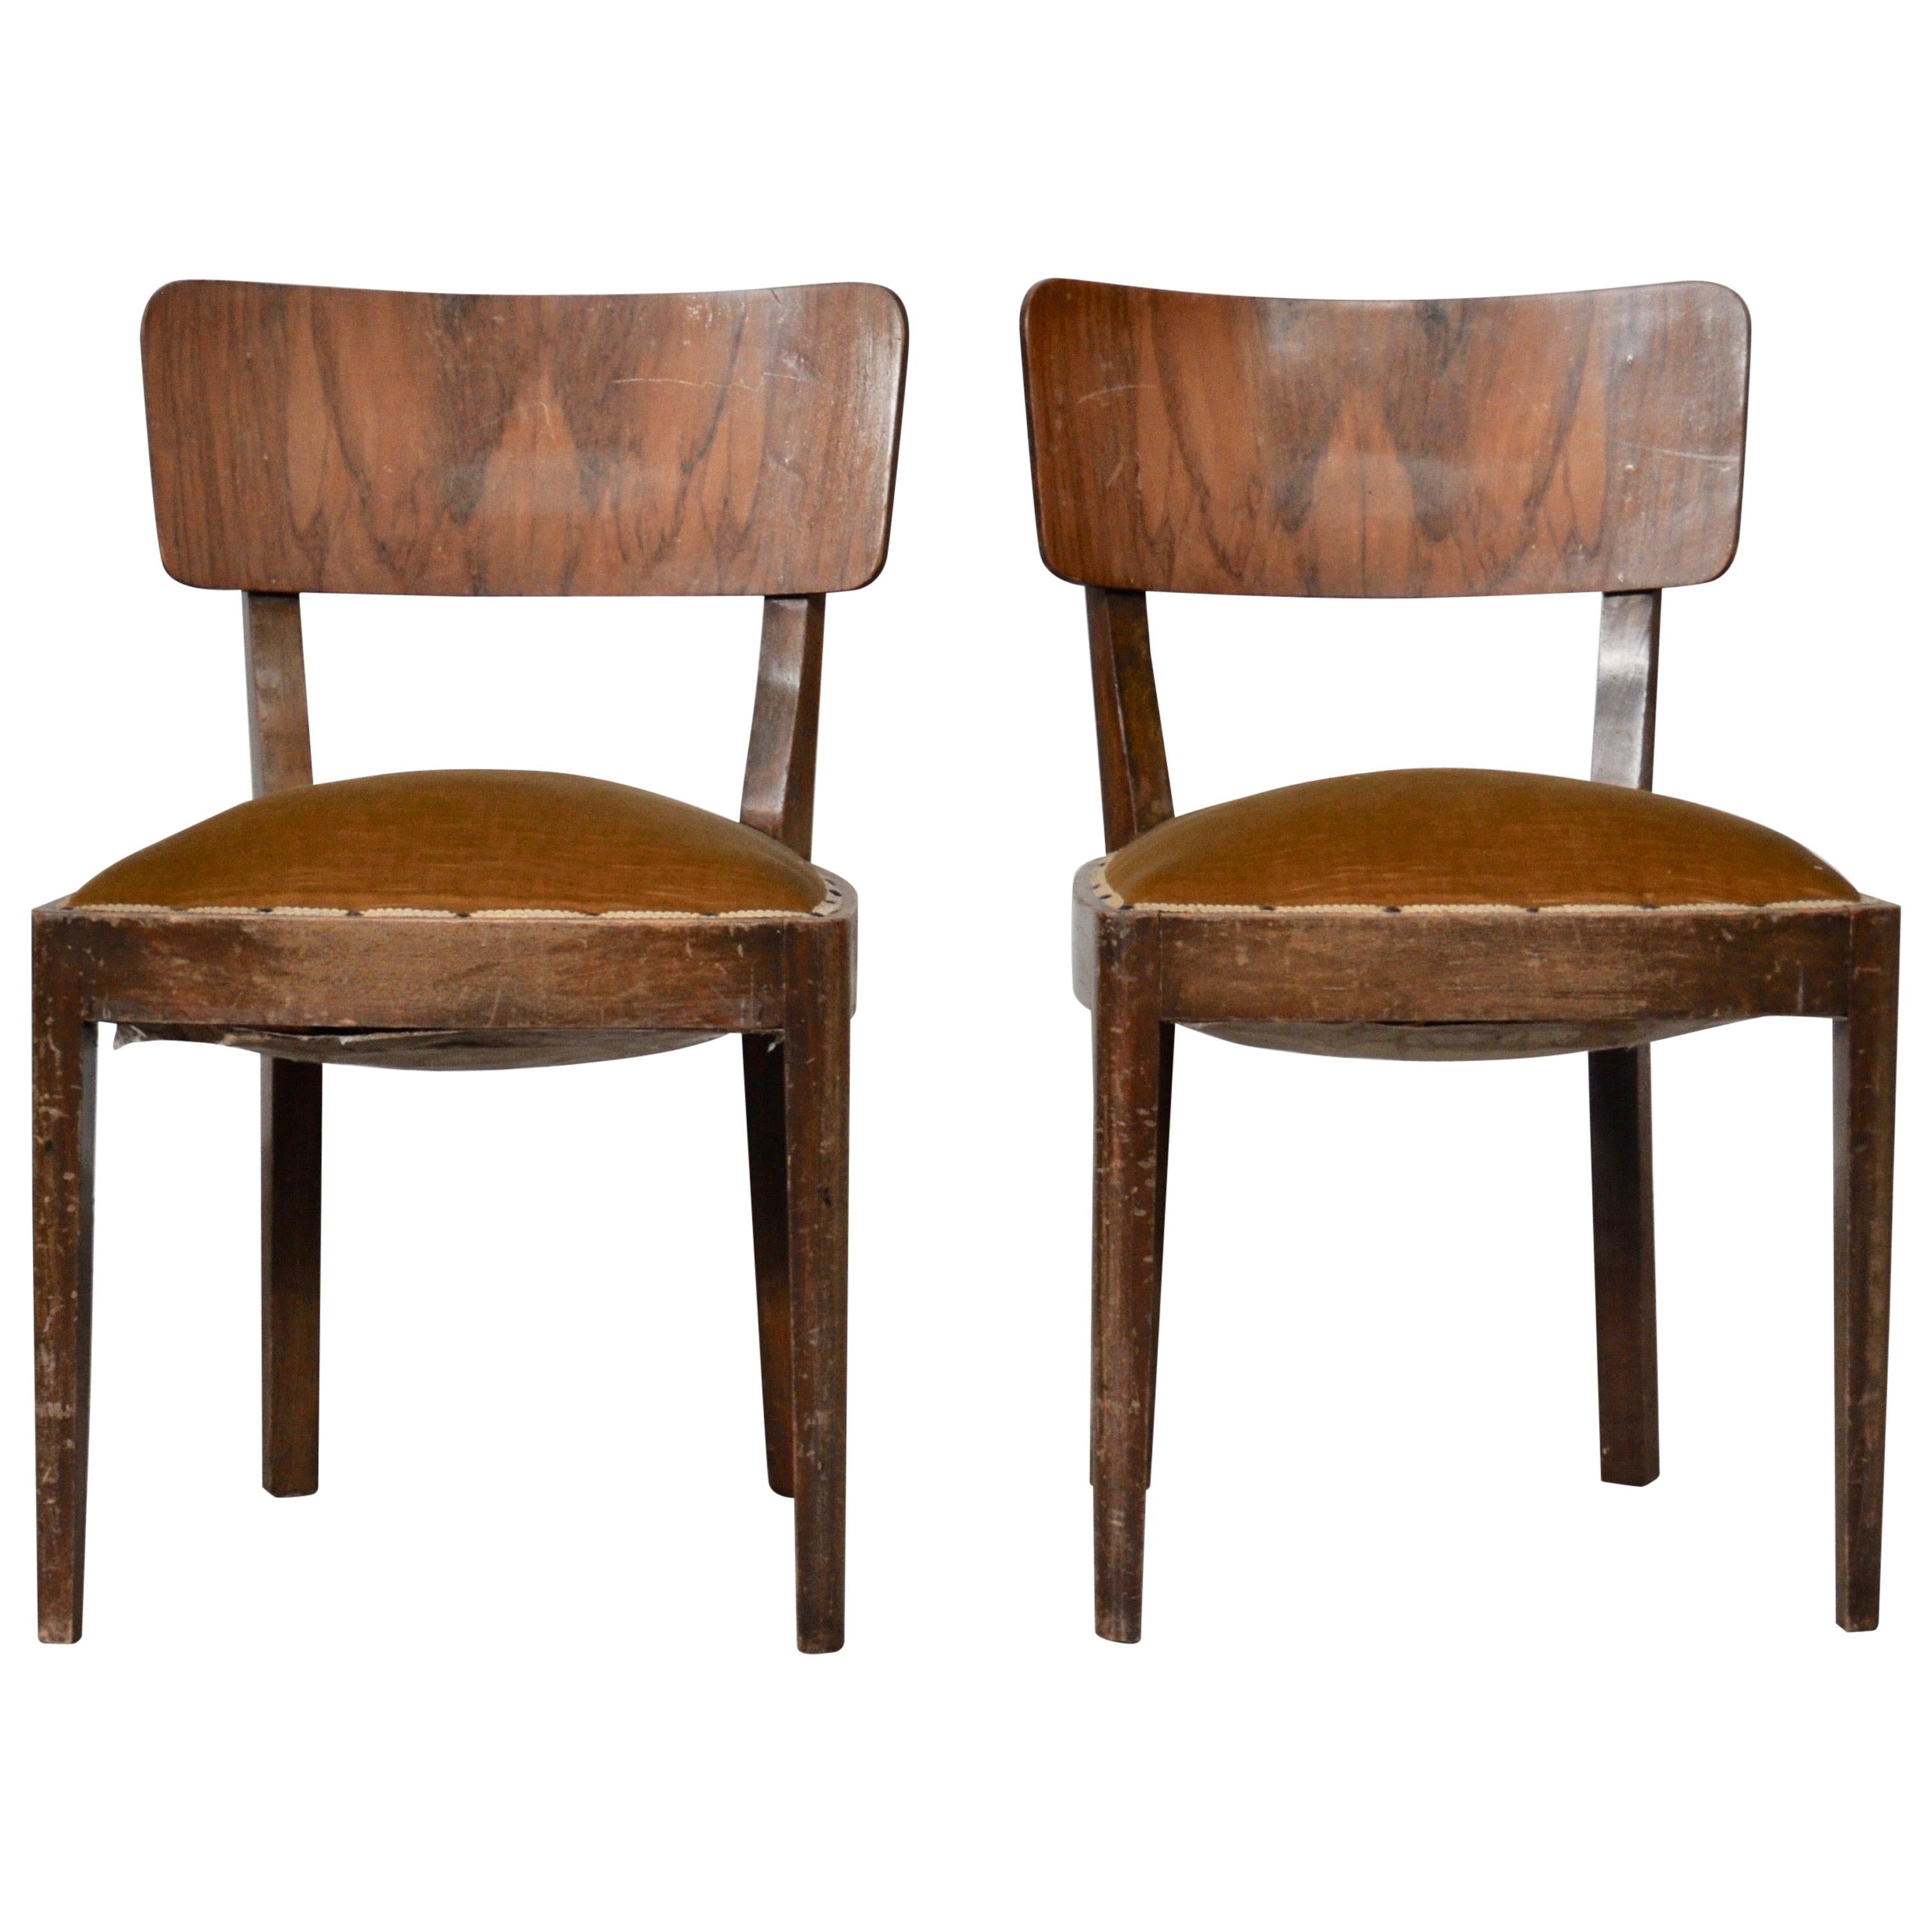 Vintage Walnut Chairs with Studs & Straps and Springs in Velvet, Italy, 1920s, S For Sale